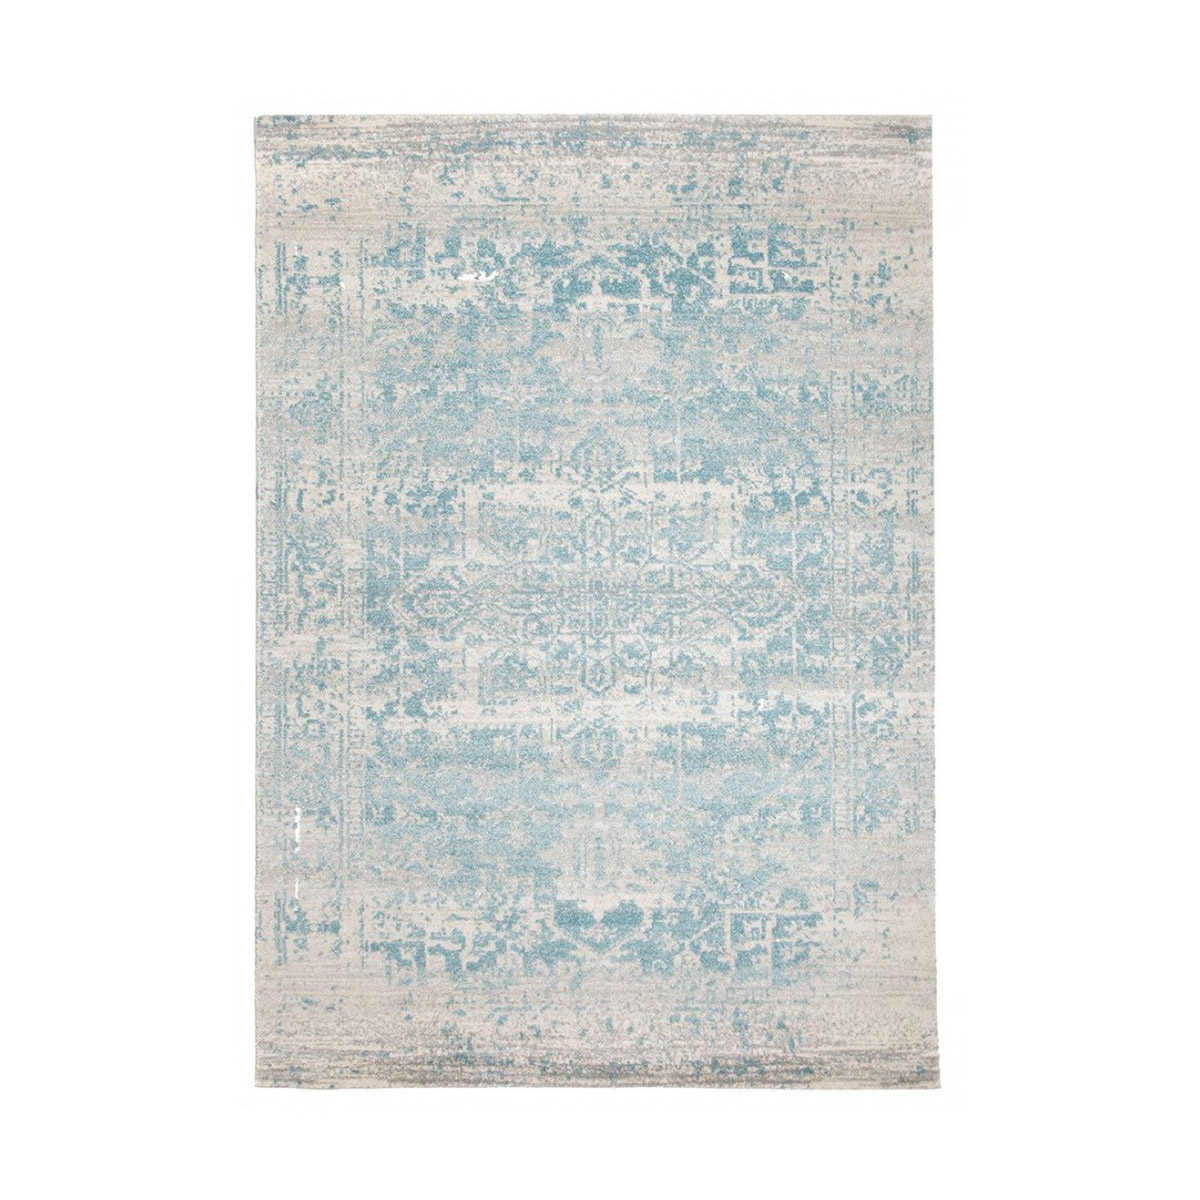 Dalvic ivory and light blue distressed rug